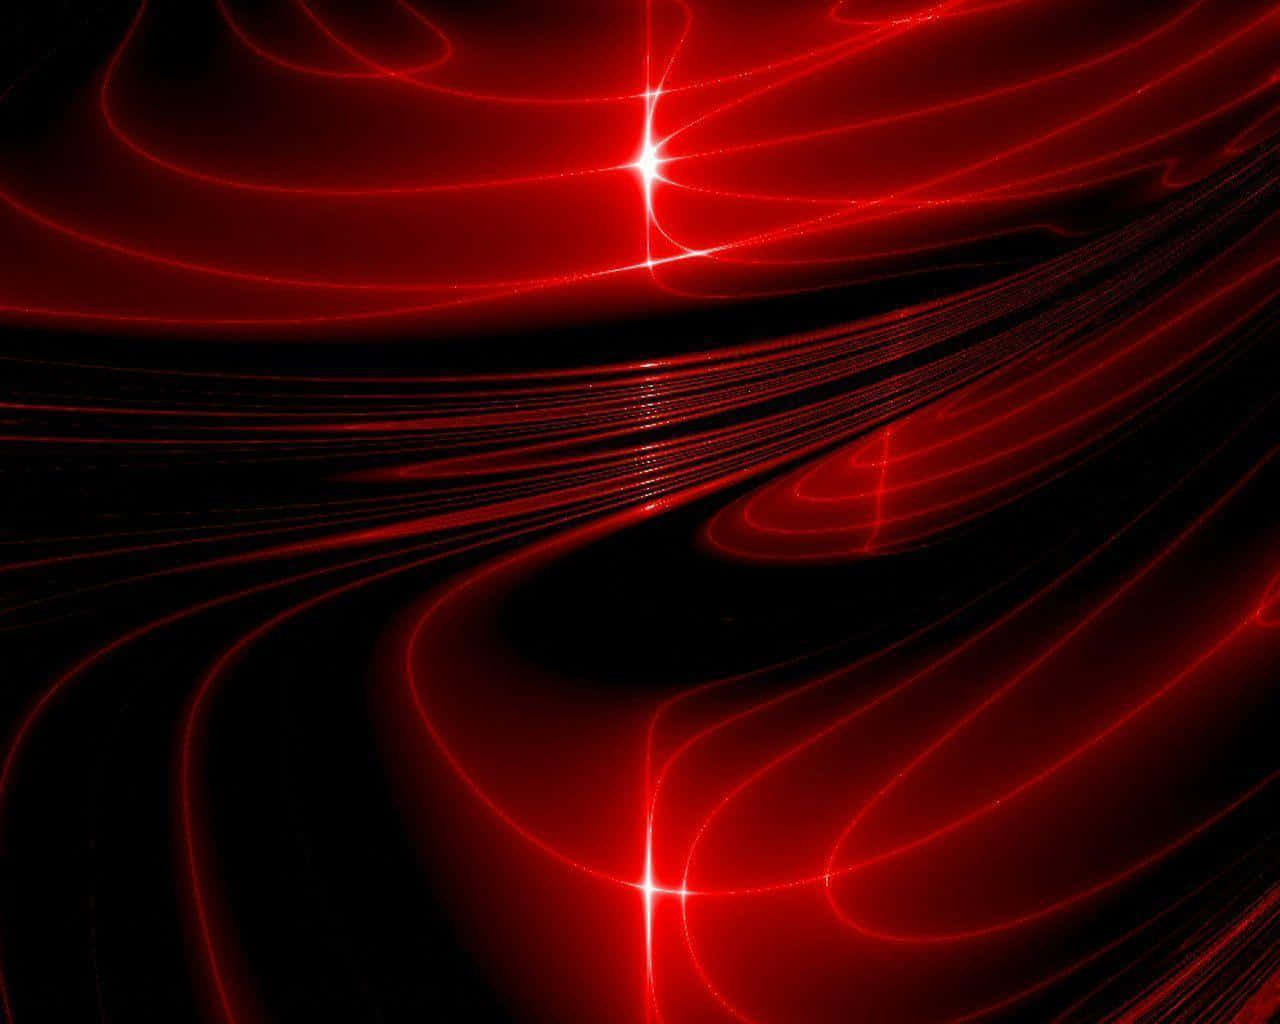 A vibrant and modern red and black background